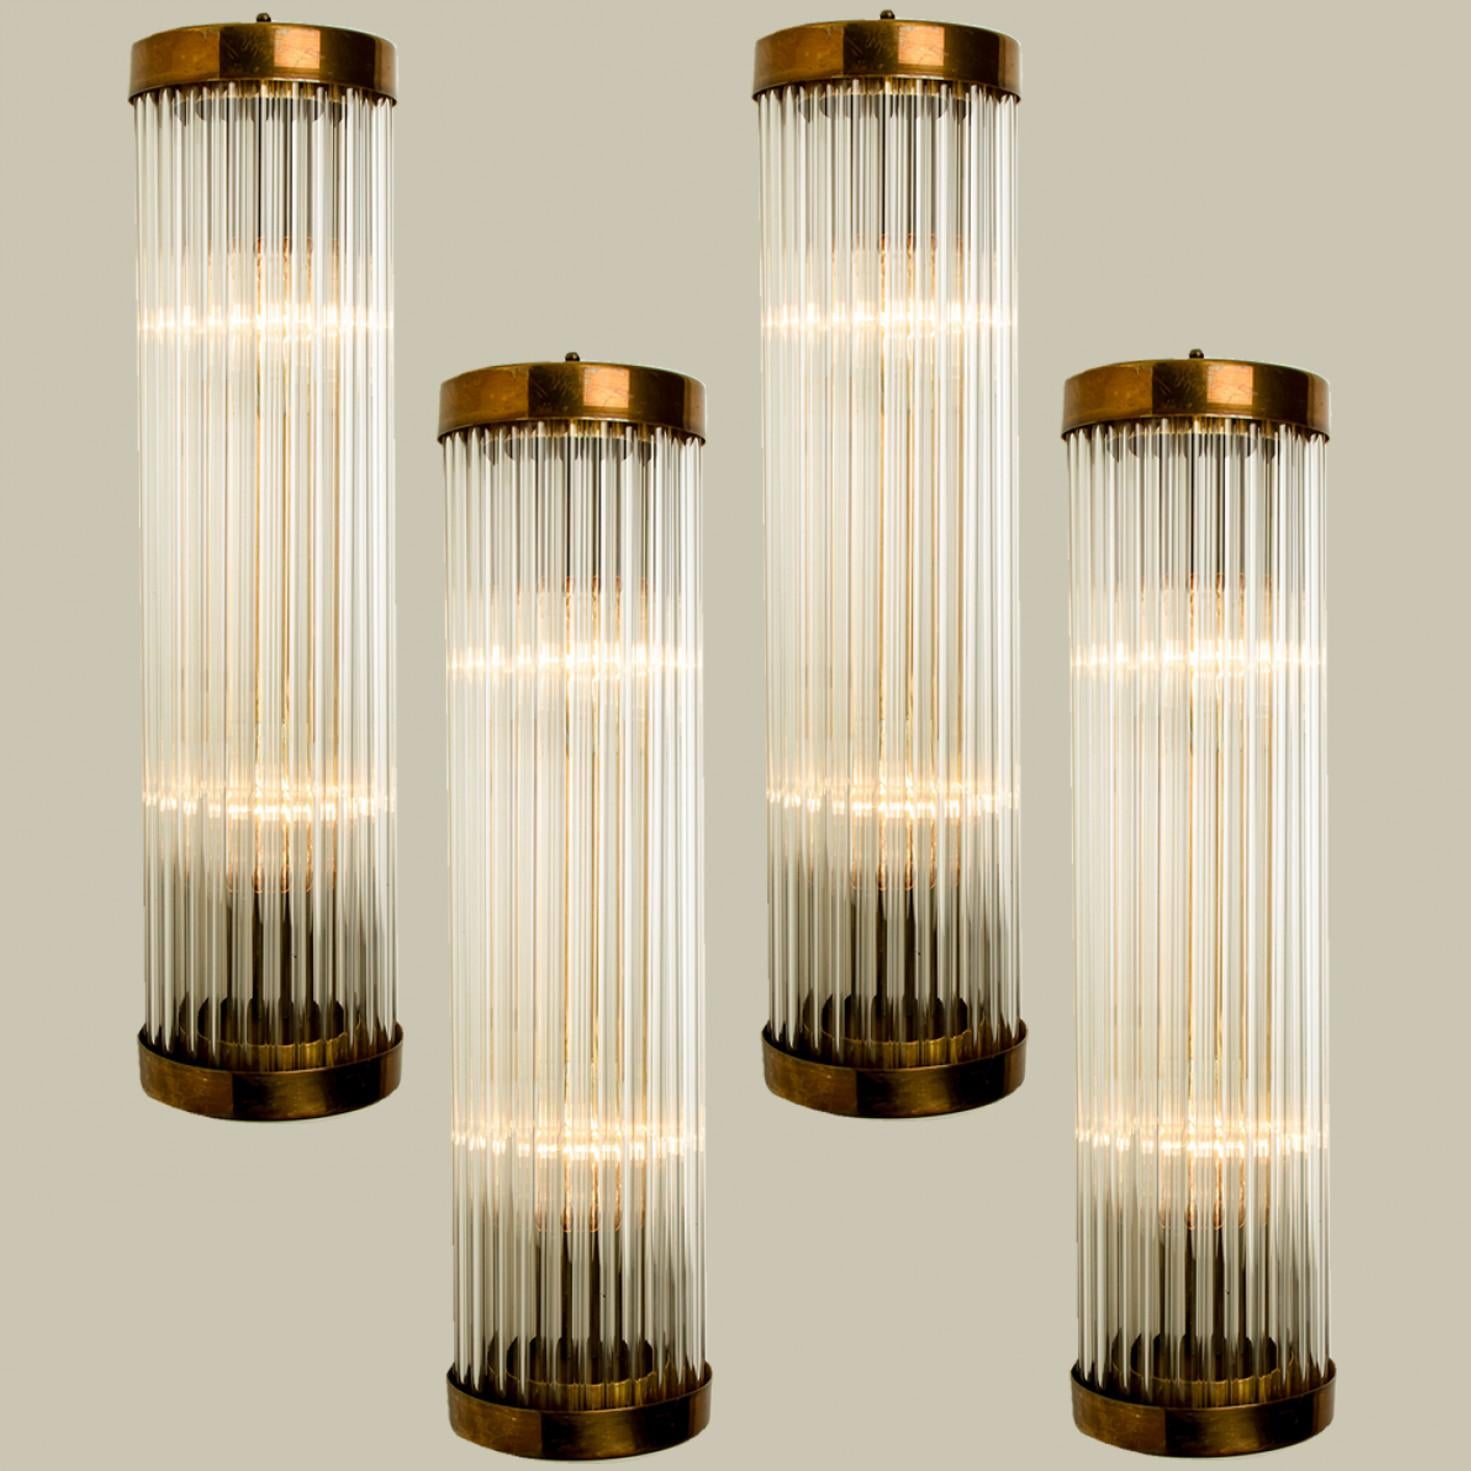 


A  stunning  Art Deco Machine Age skyscraper style sconce. With their clean modernist lines and beautiful attention to detail, these sconces would be a winning addition to any style of interior from classic Deco to contemporary. They have been